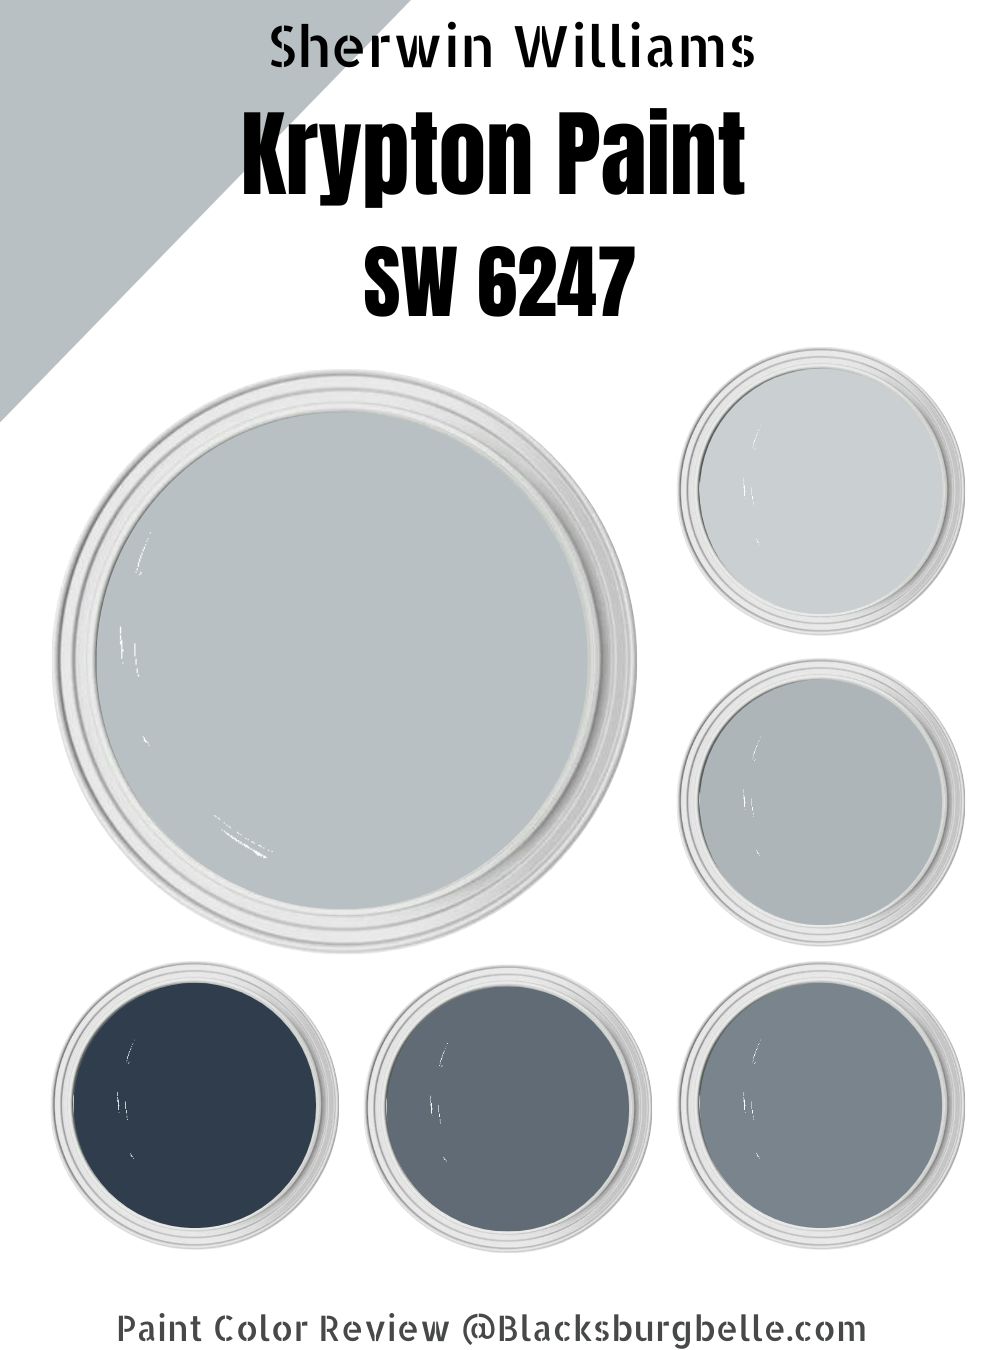 Sherwin-Williams Krypton Paint (SW 6247) Color Review & Pics